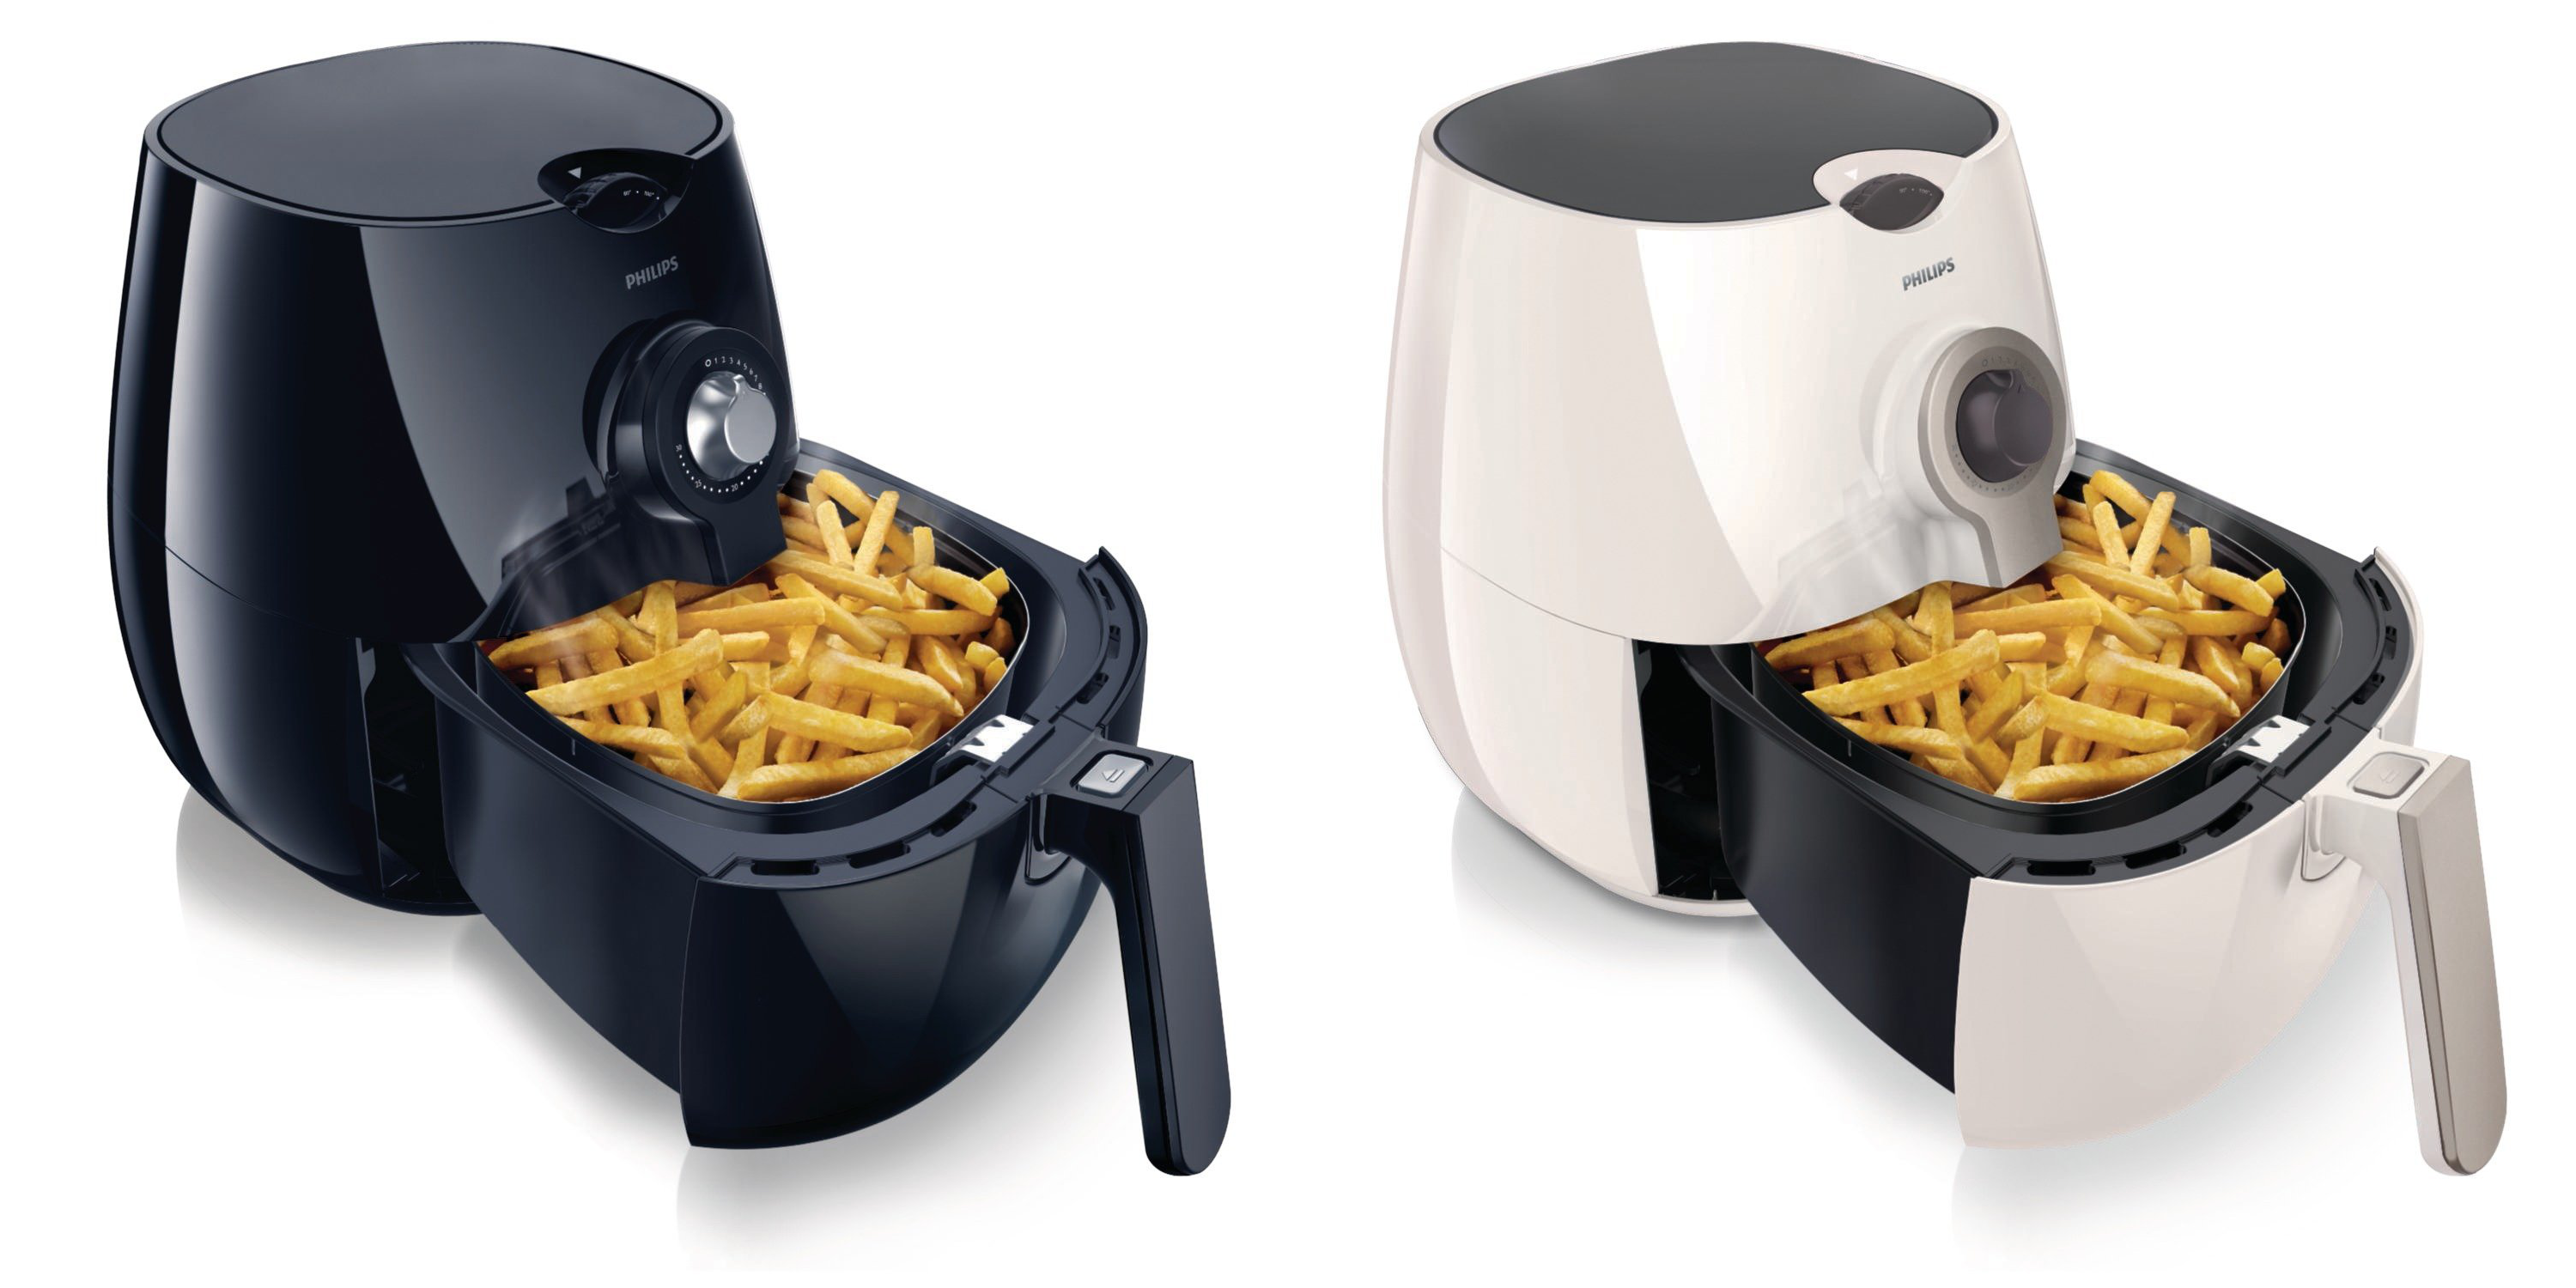 https://9to5toys.com/wp-content/uploads/sites/5/2015/08/philips-airfryer-with-rapid-air-technology-in-black-or-white-hd9220-26-sale-01.png